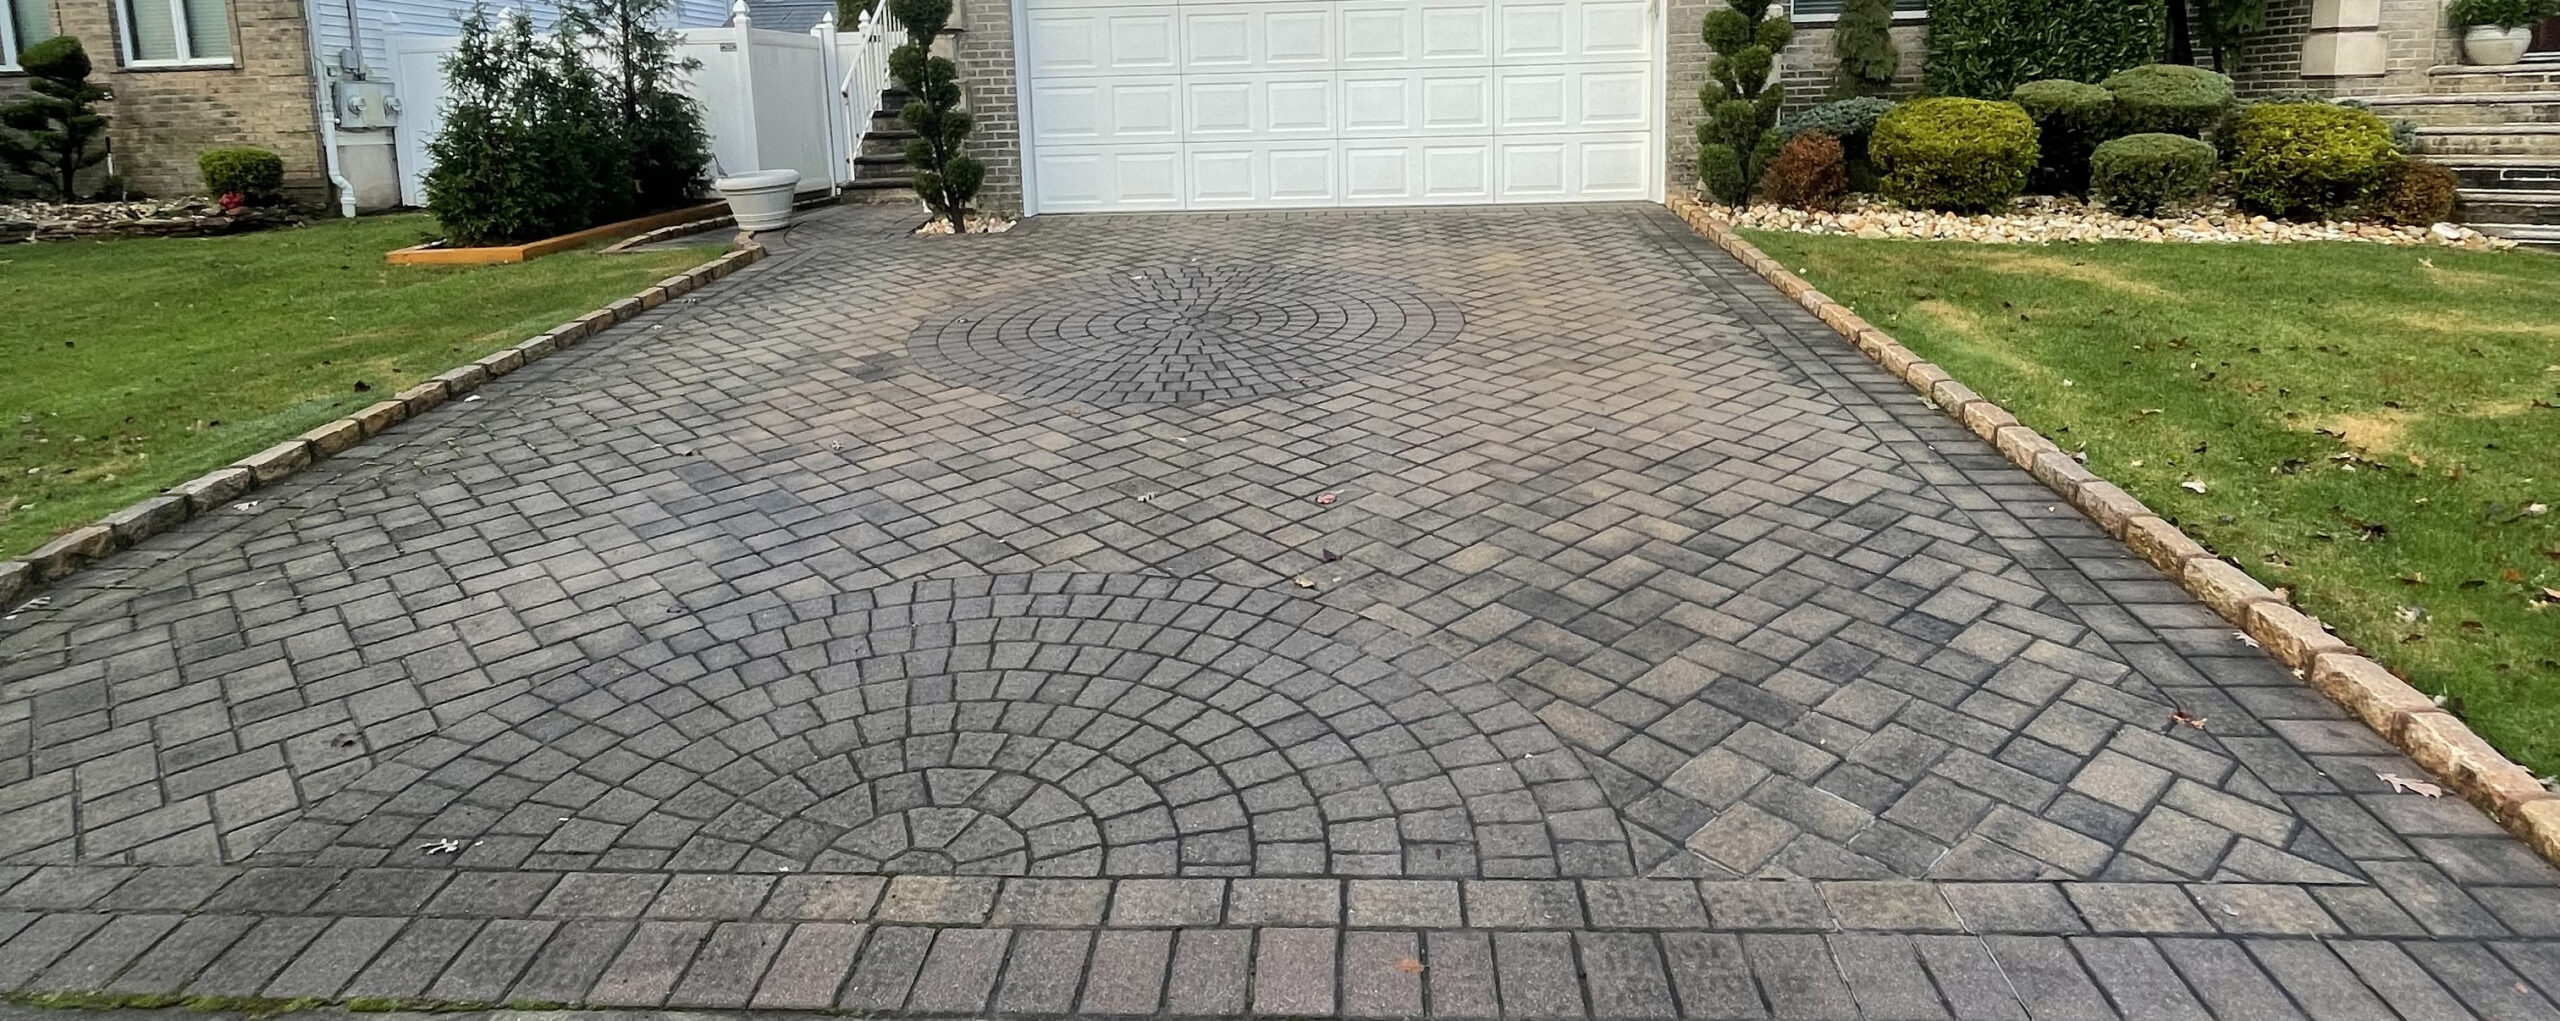 Residential-Driveway-Cleaning-before